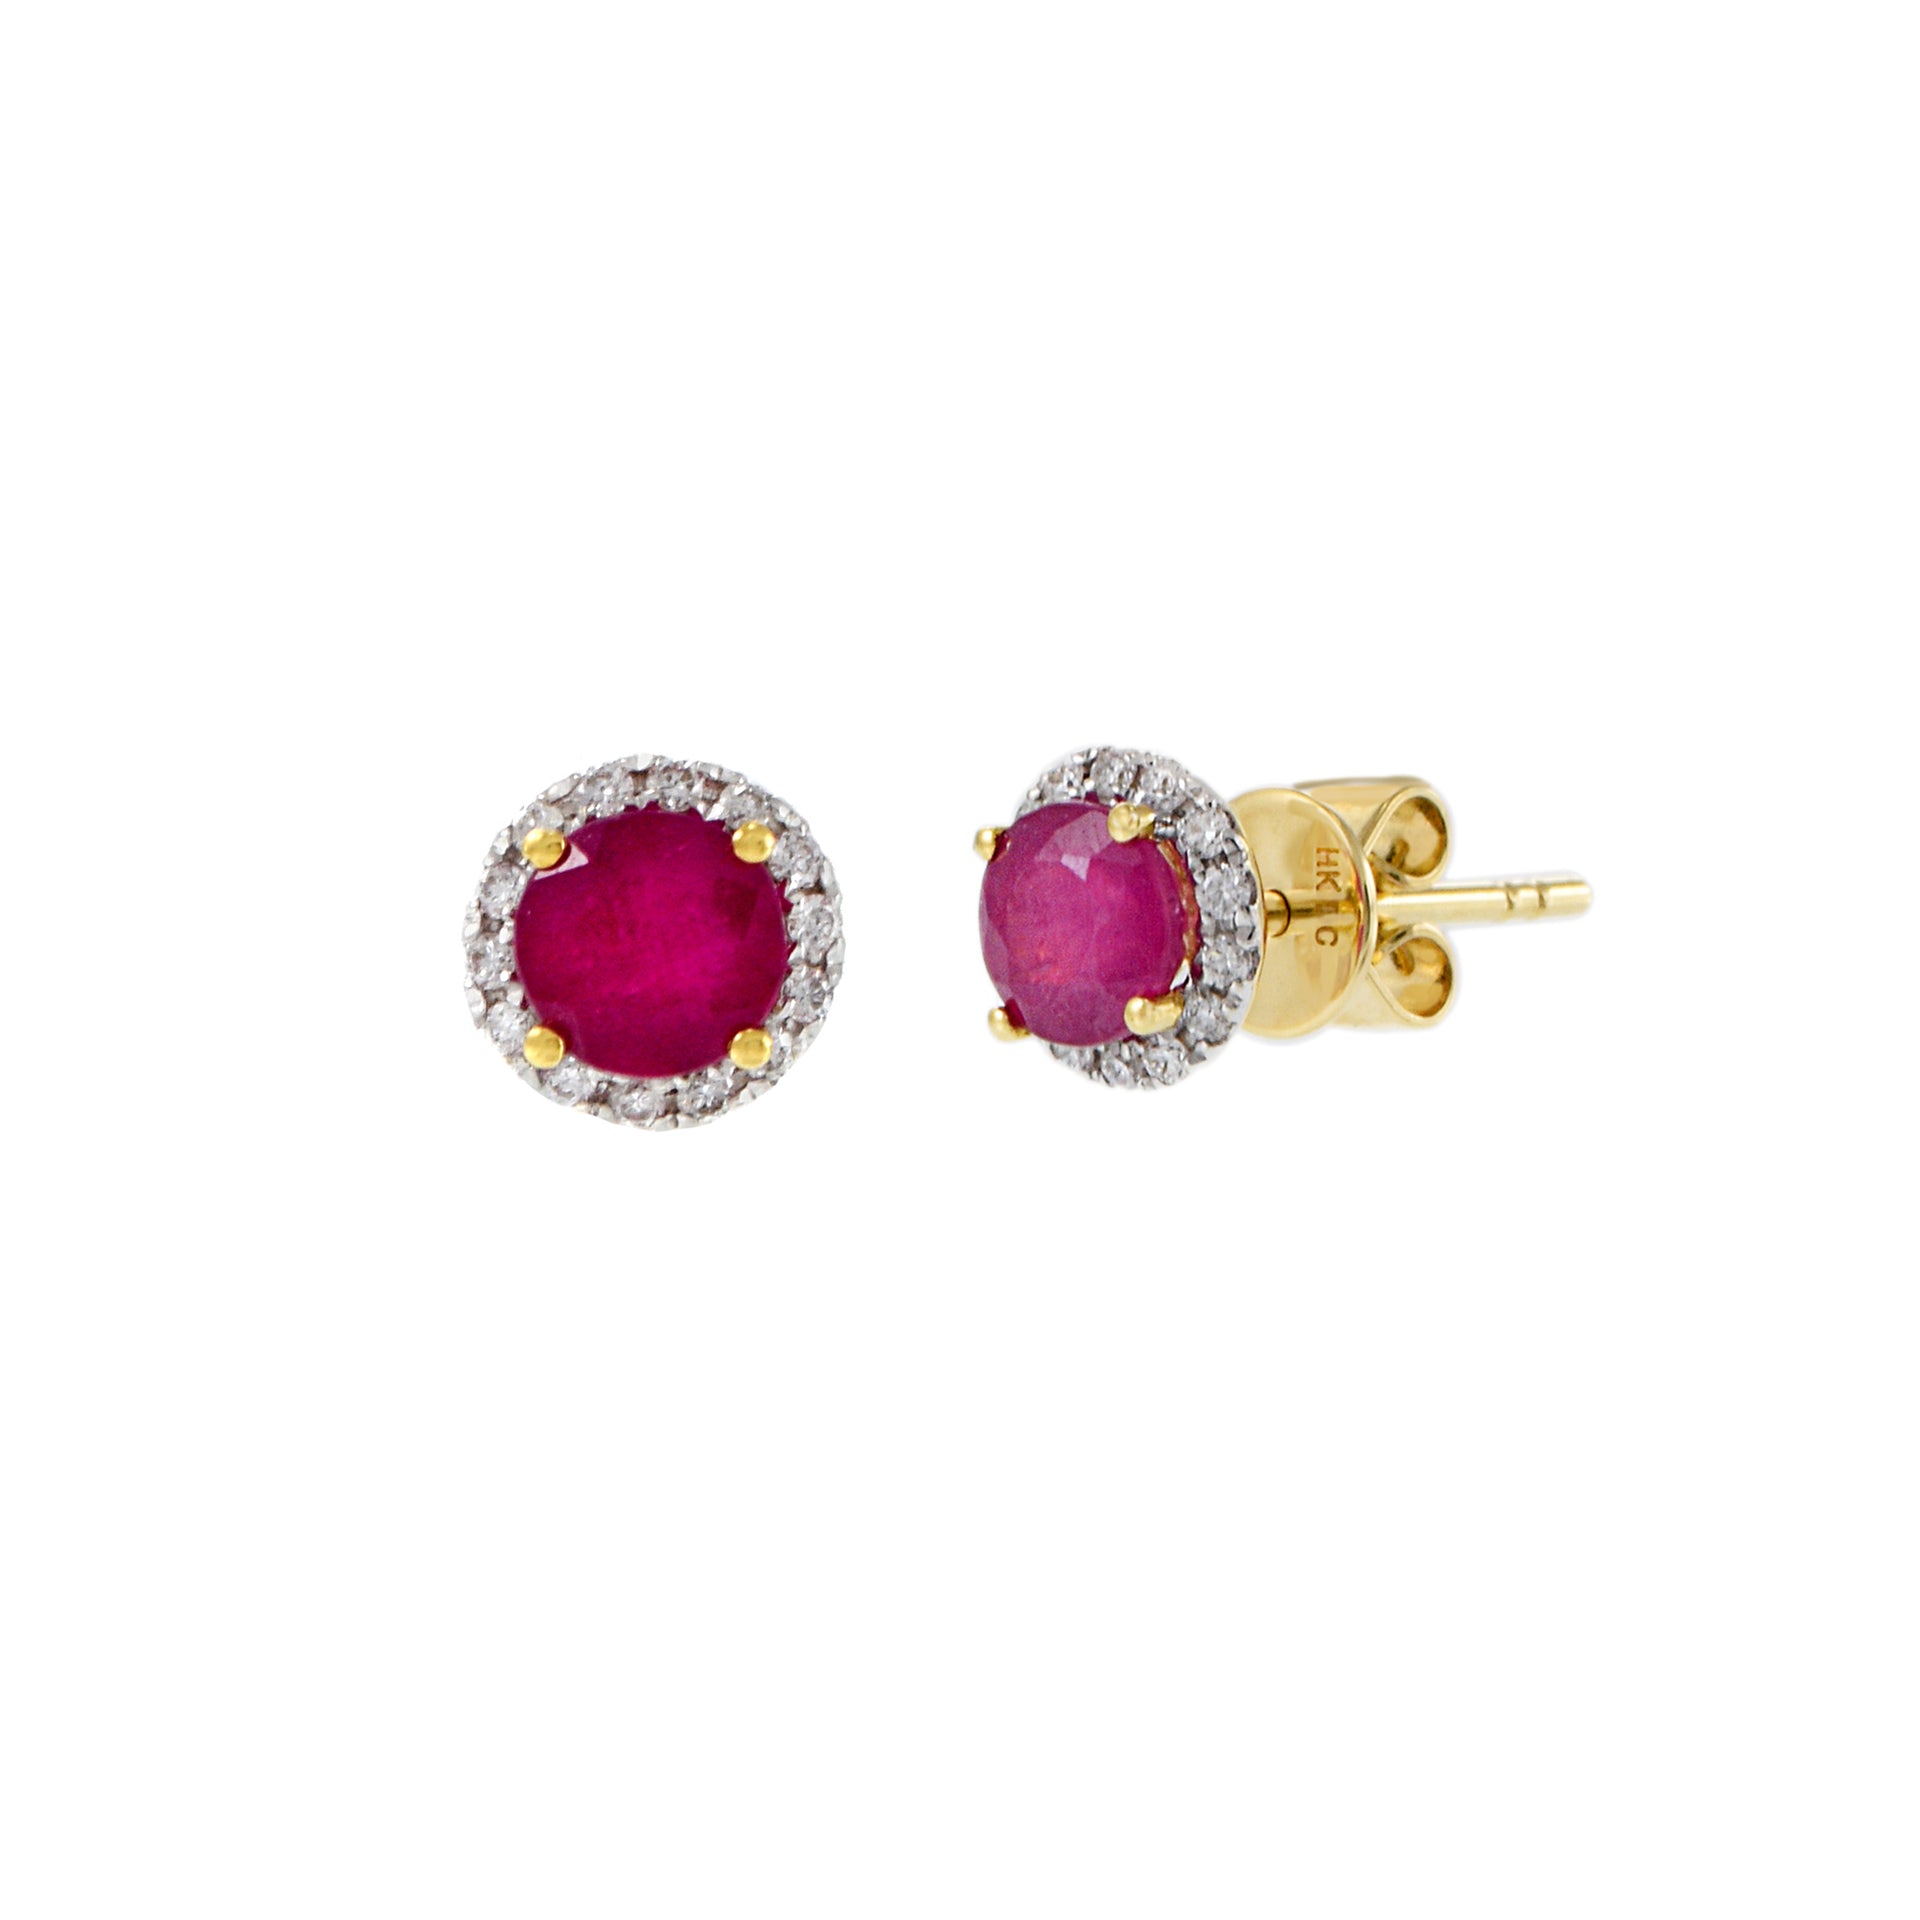 18KT Yellow Gold Diamond And Ruby Center Earrings